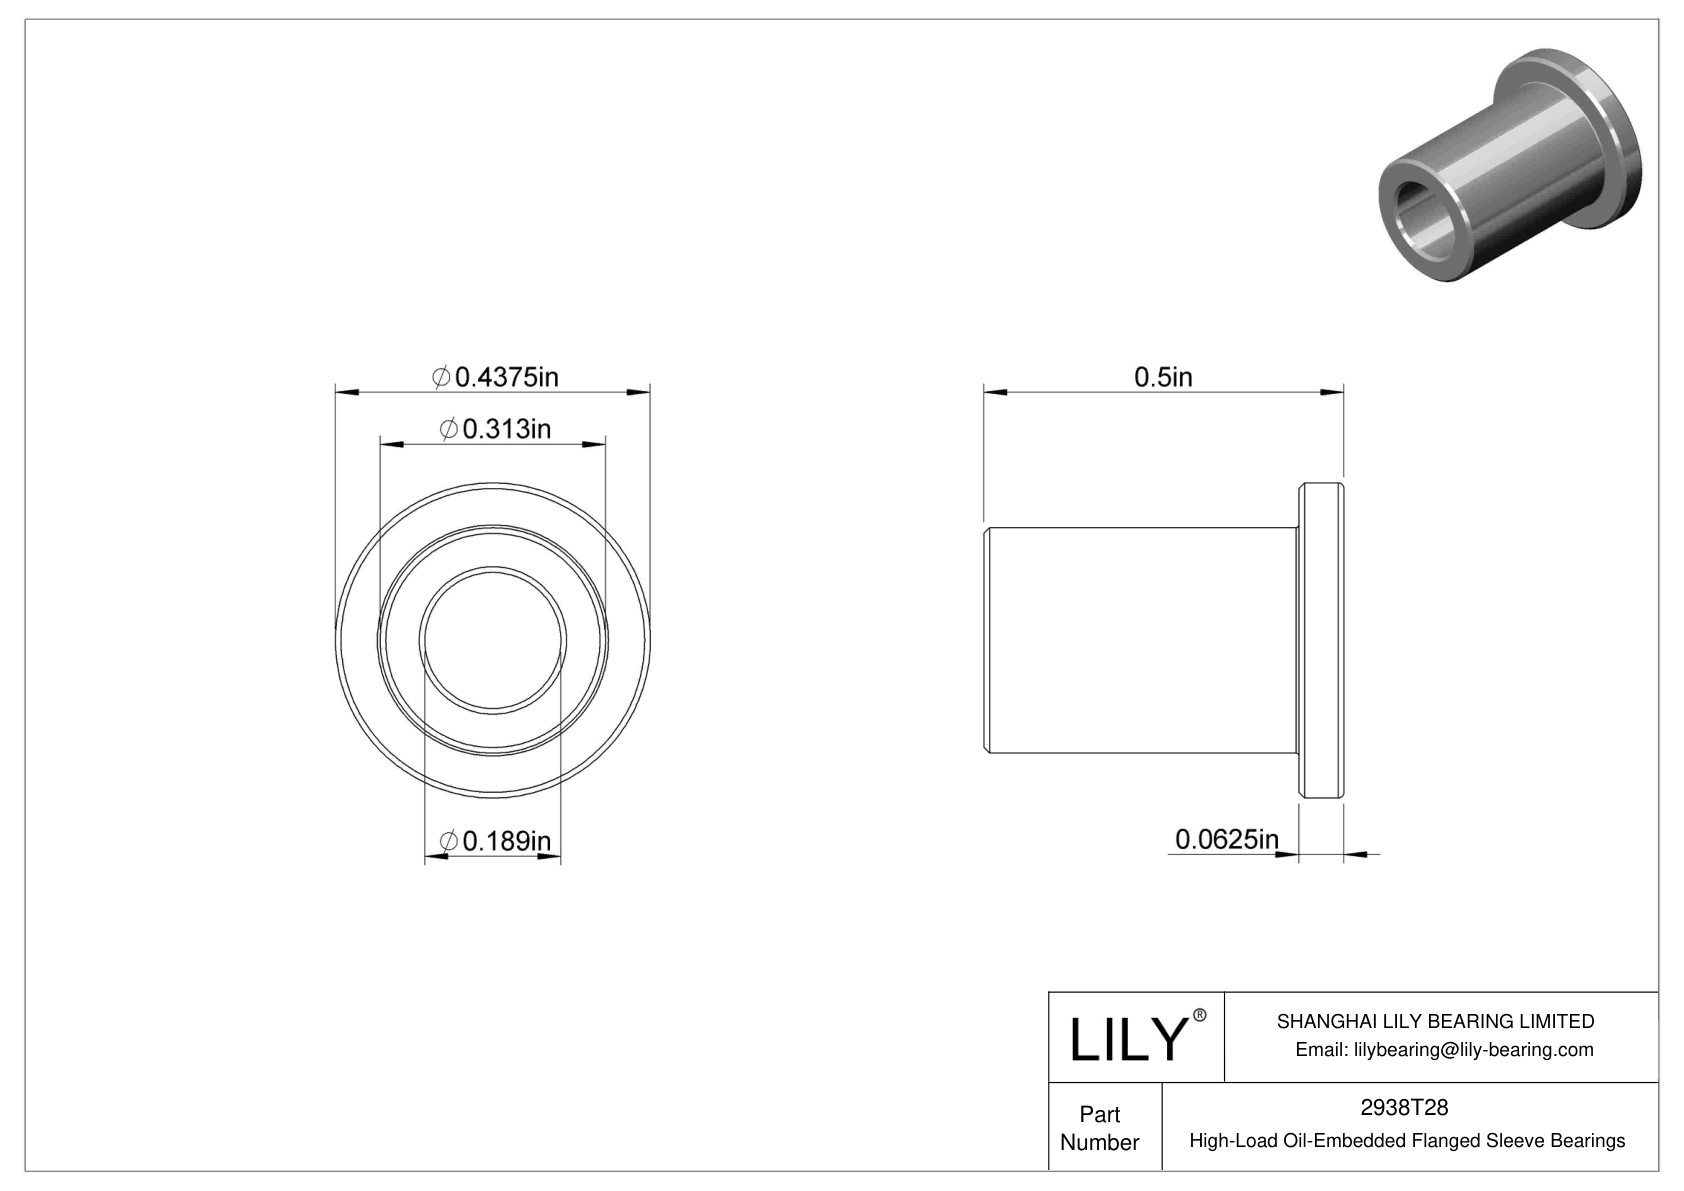 CJDITCI High-Load Oil-Embedded Flanged Sleeve Bearings cad drawing